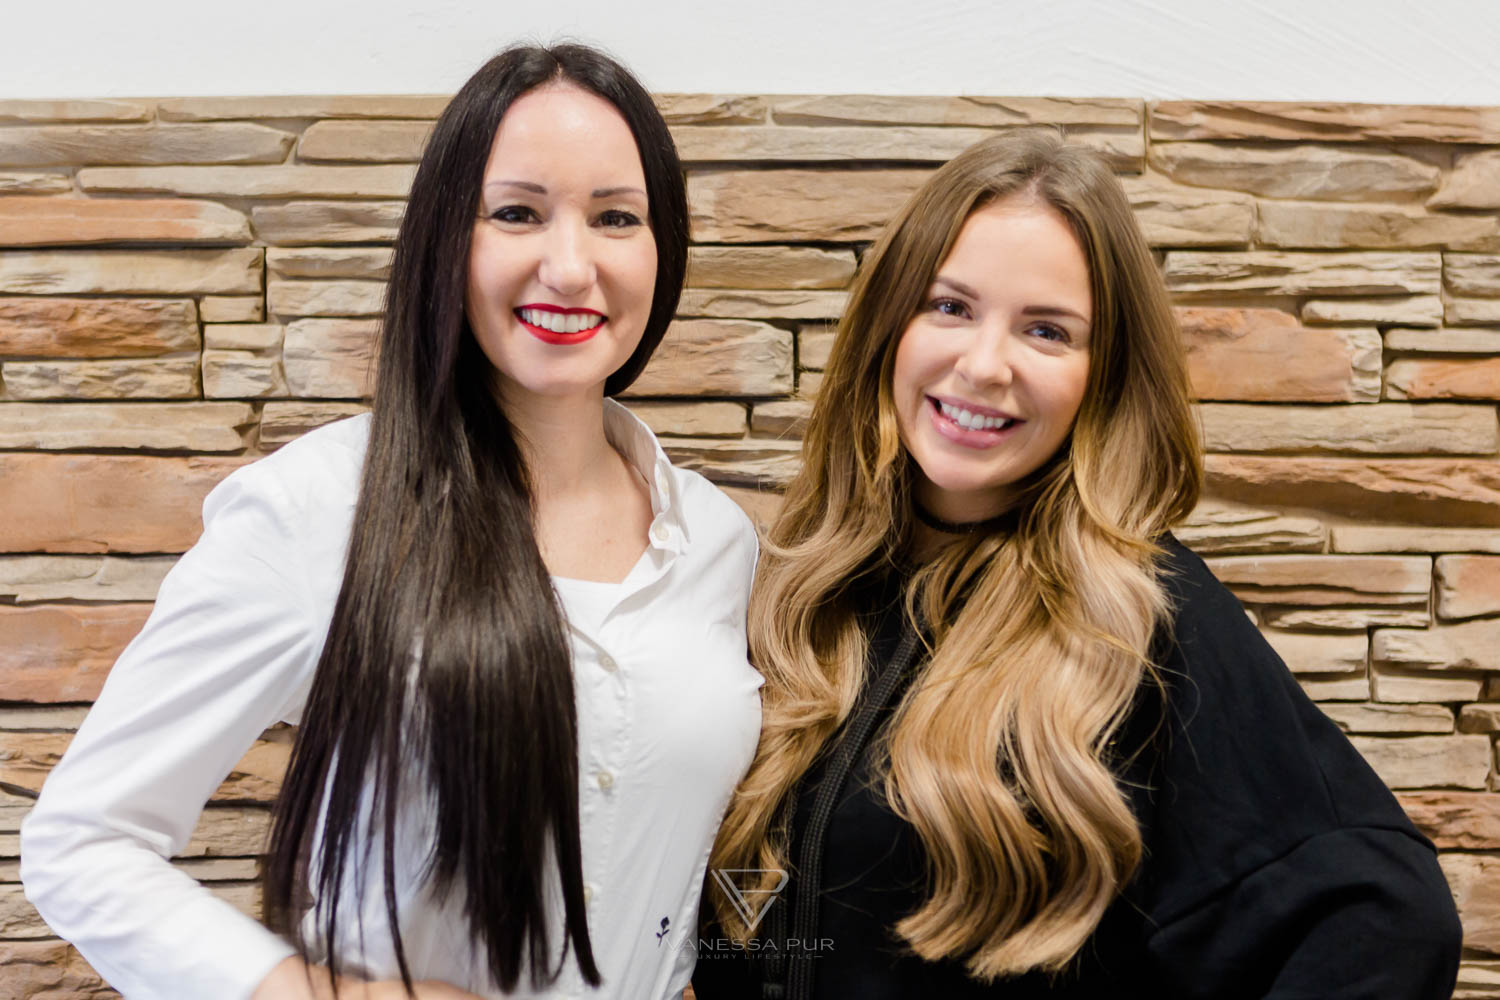 Tape Extensions Experience - Comparison with Bondings - Hair Extension - Extensions - Tapes, Bondings or Clips - Which method is good? How much do hair extensions cost? Where can you get hair extensions done? Who is the best hairdresser? What are the disadvantages of hair extensions